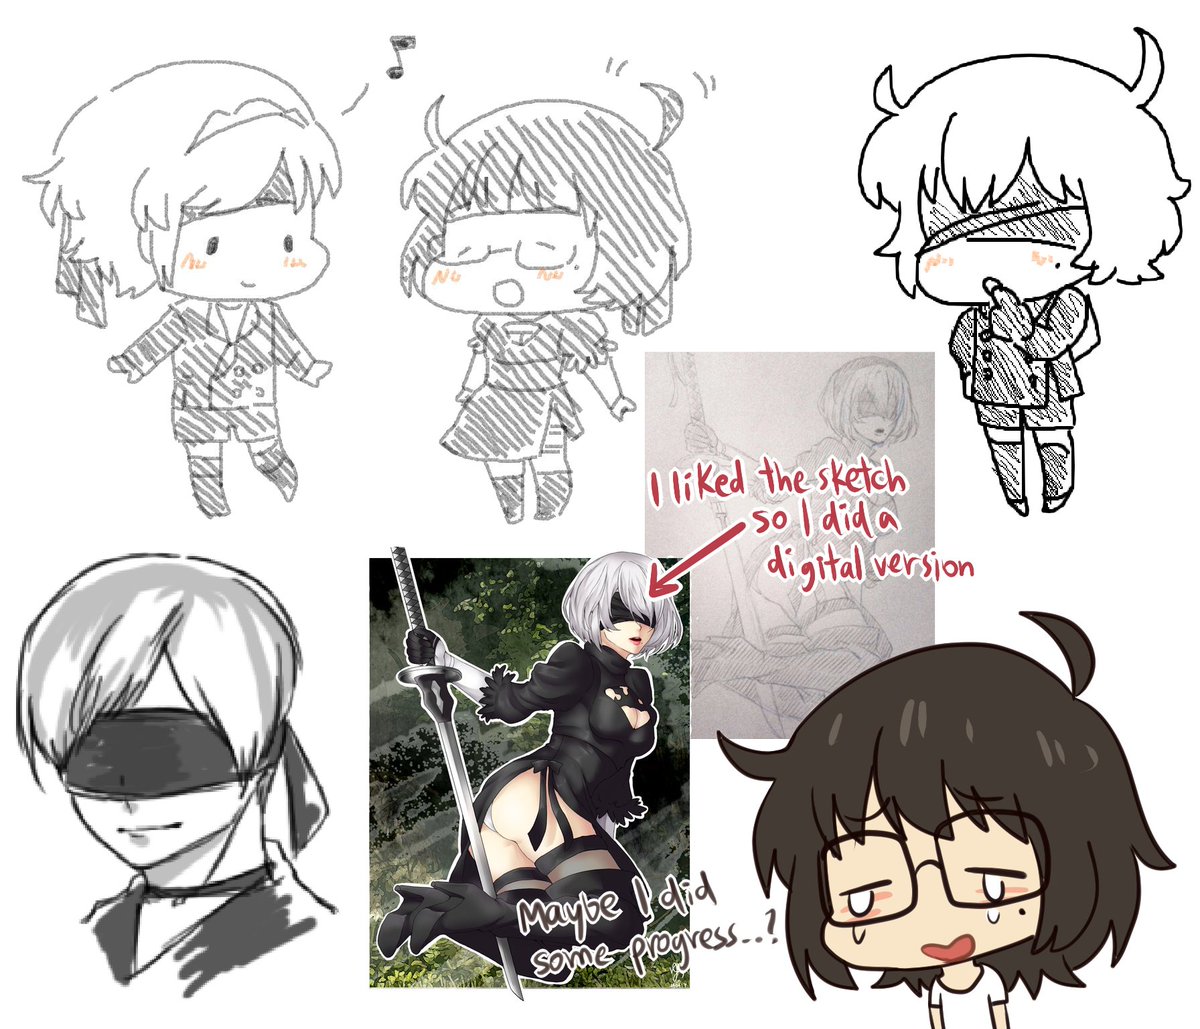 Also dropping my old doodles related- 